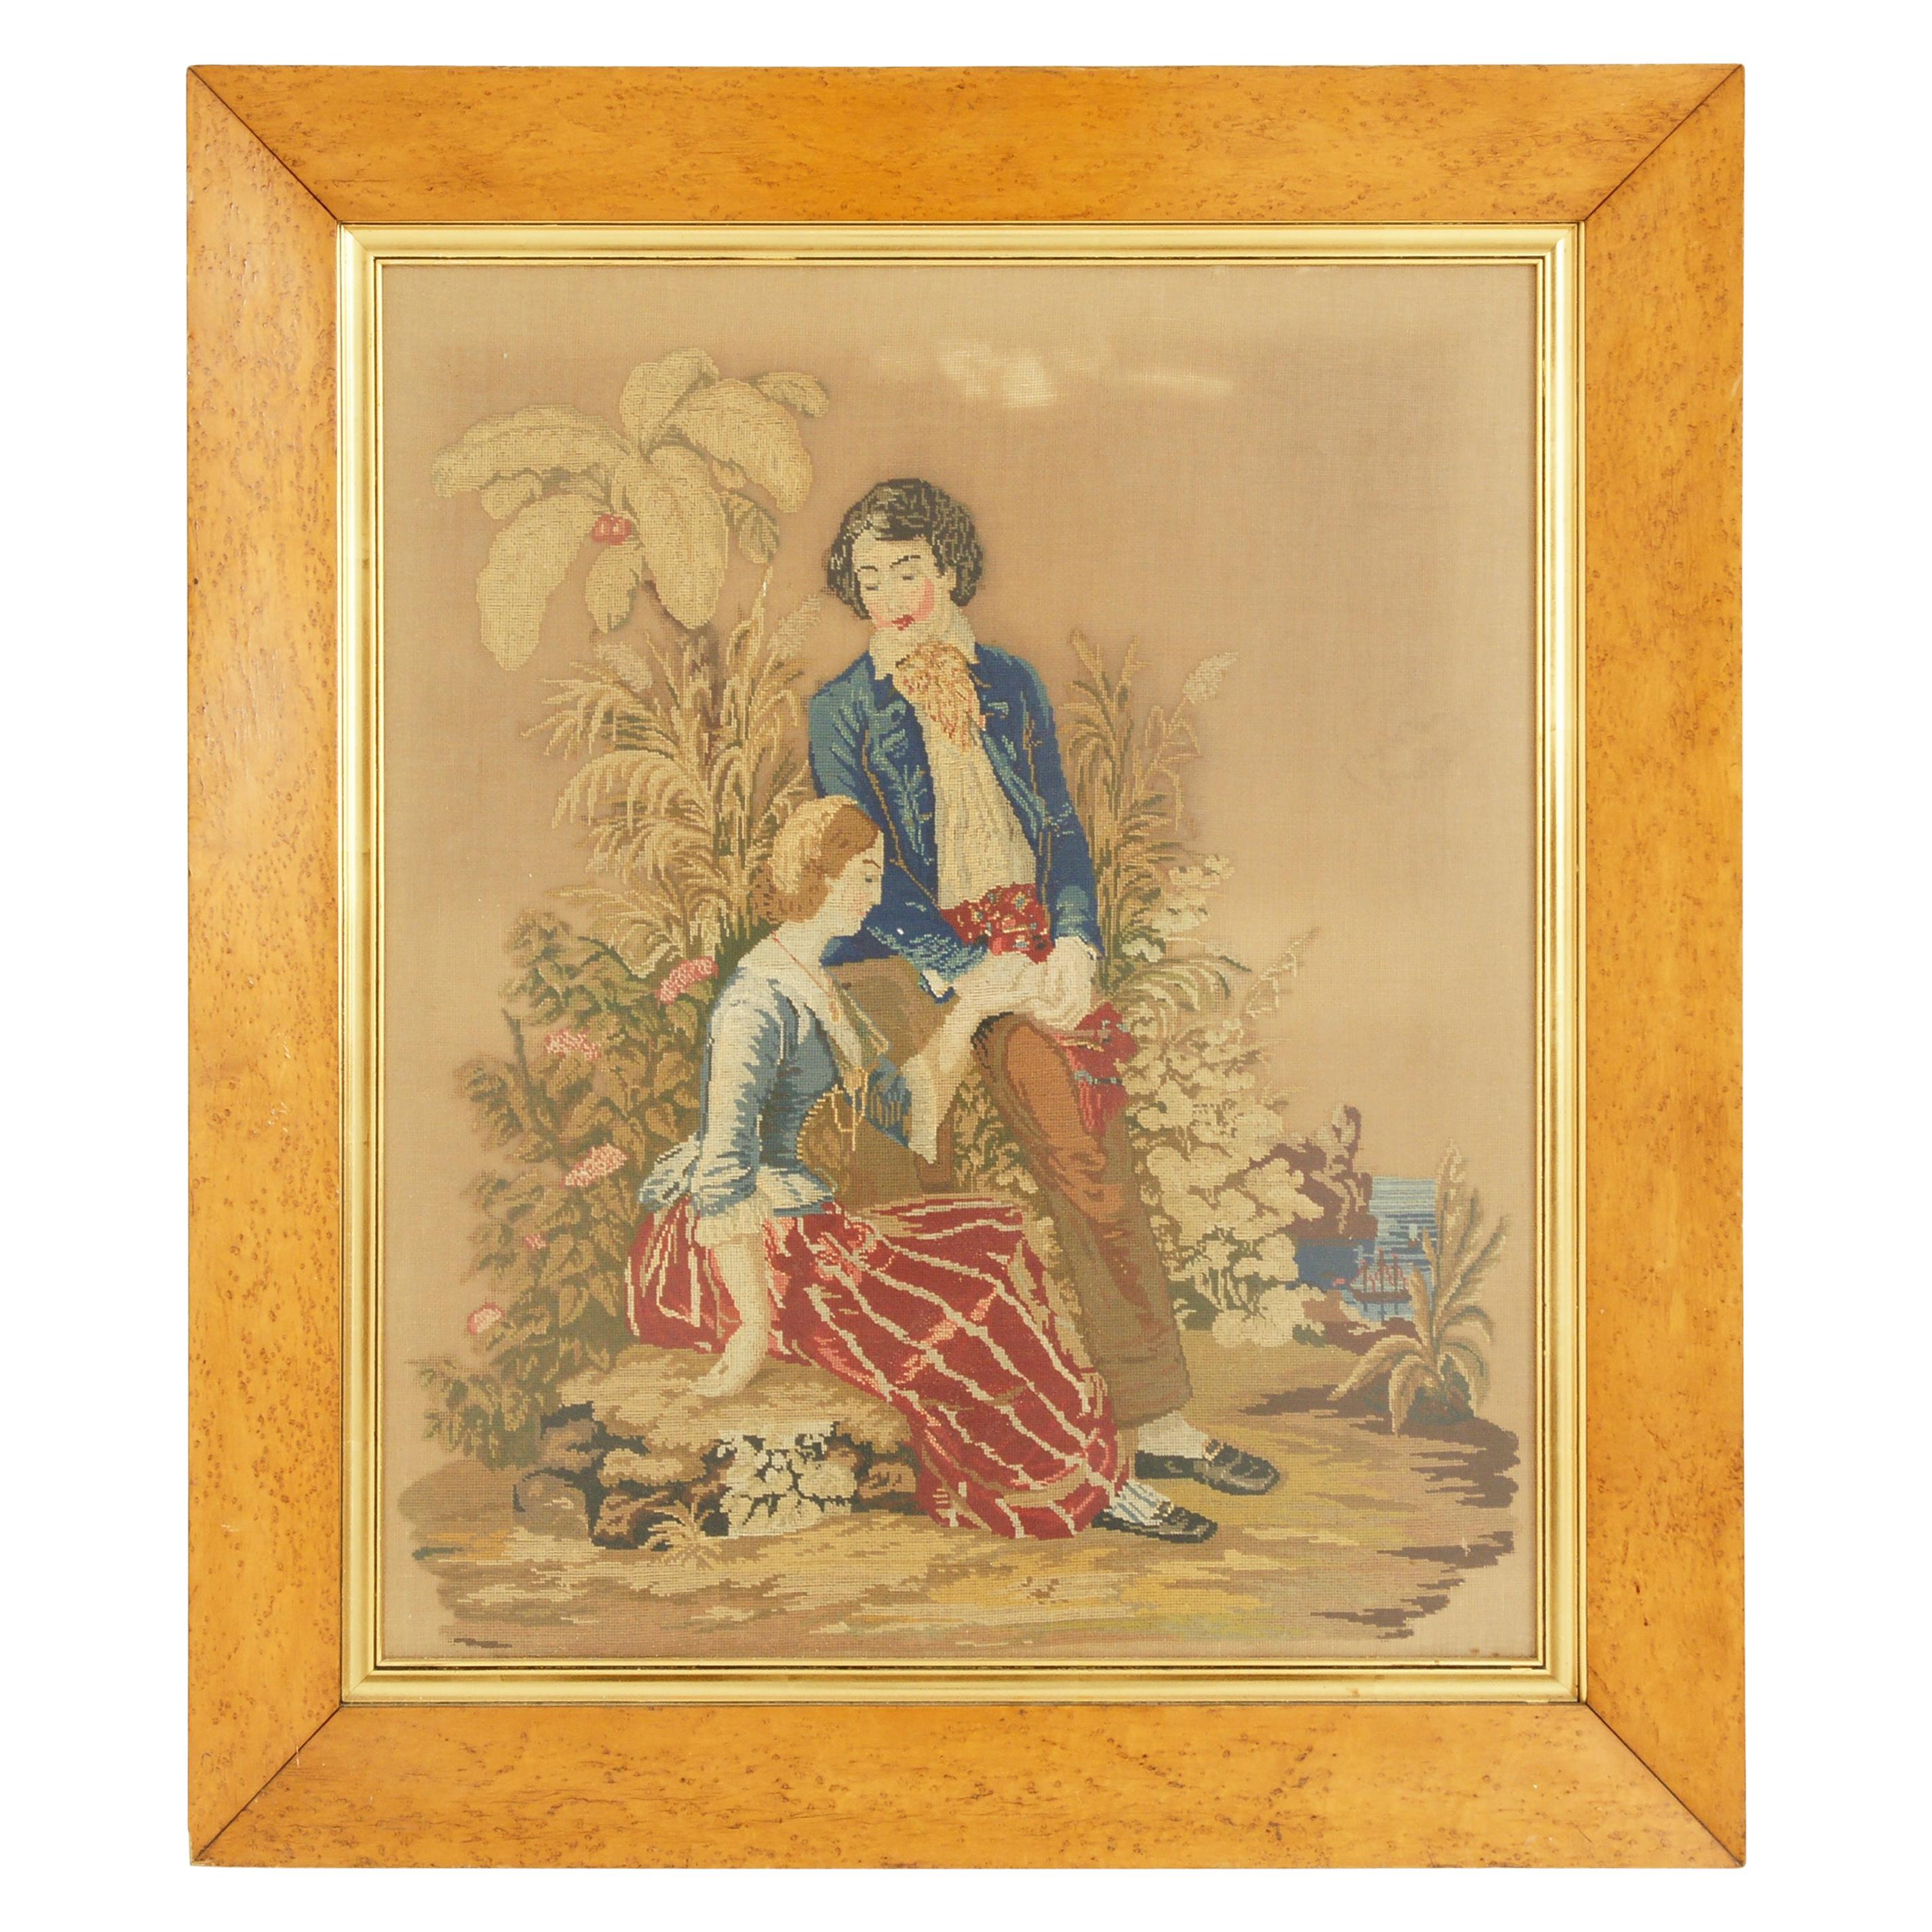 Framed Needlepoint - 27 For Sale on 1stDibs | needlepoint pictures 